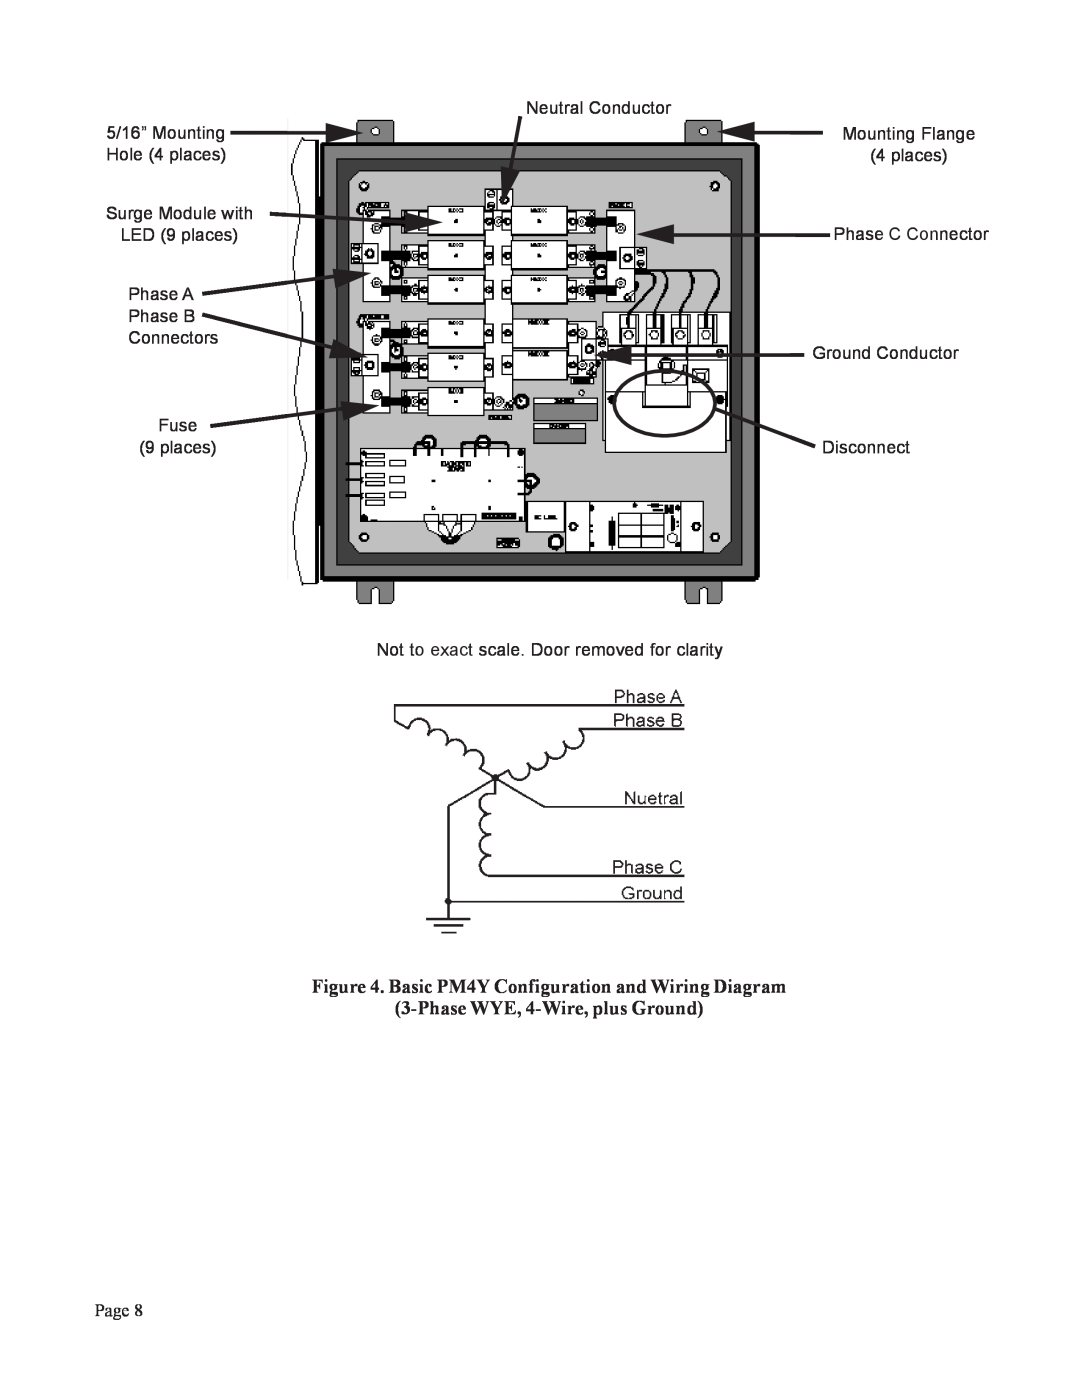 American Power Conversion PM3 user manual Basic PM4Y Configuration and Wiring Diagram, Phase WYE, 4-Wire, plus Ground 